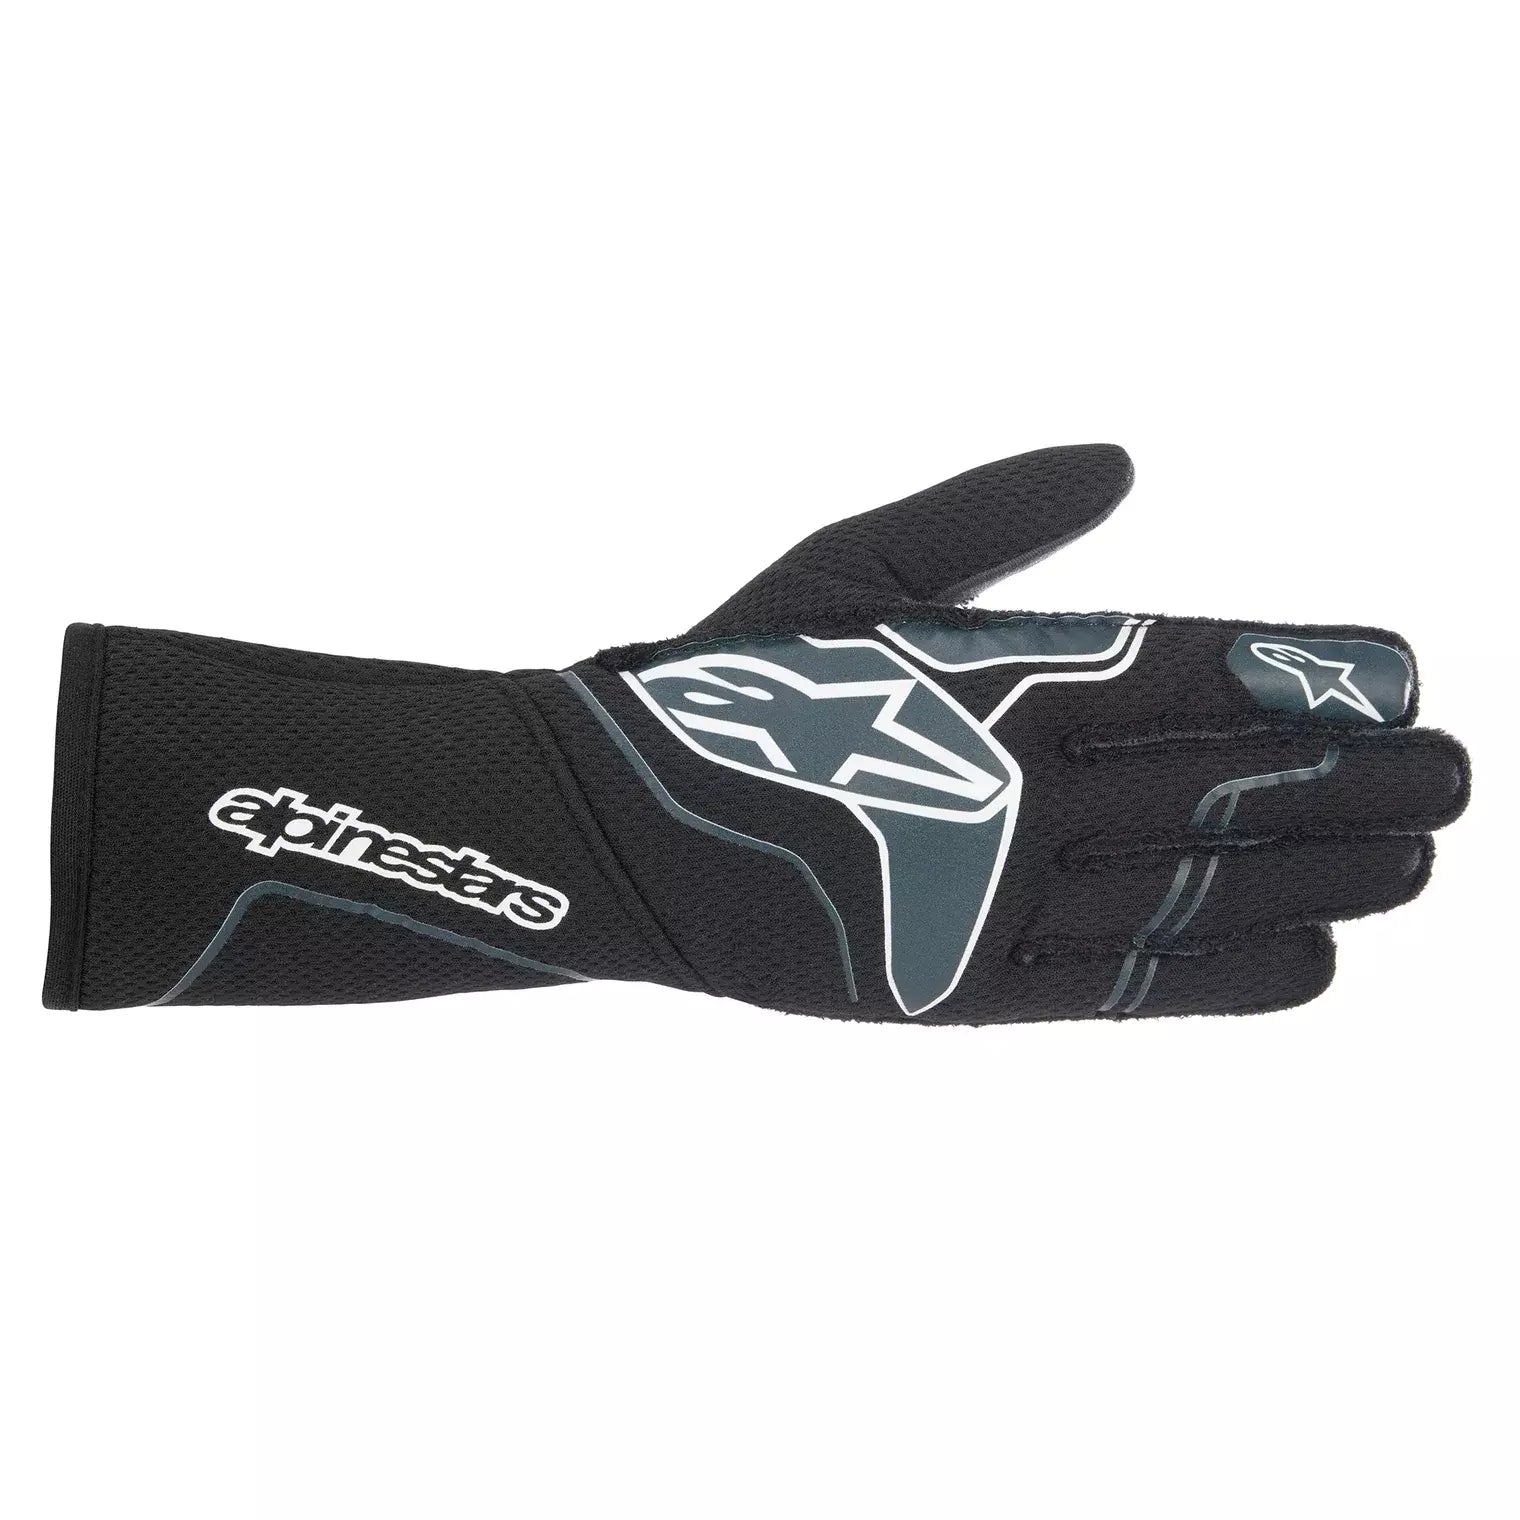 Alpinestars Gloves Tech 1-ZX Black / Grey Small Safety Clothing Driving Gloves main image